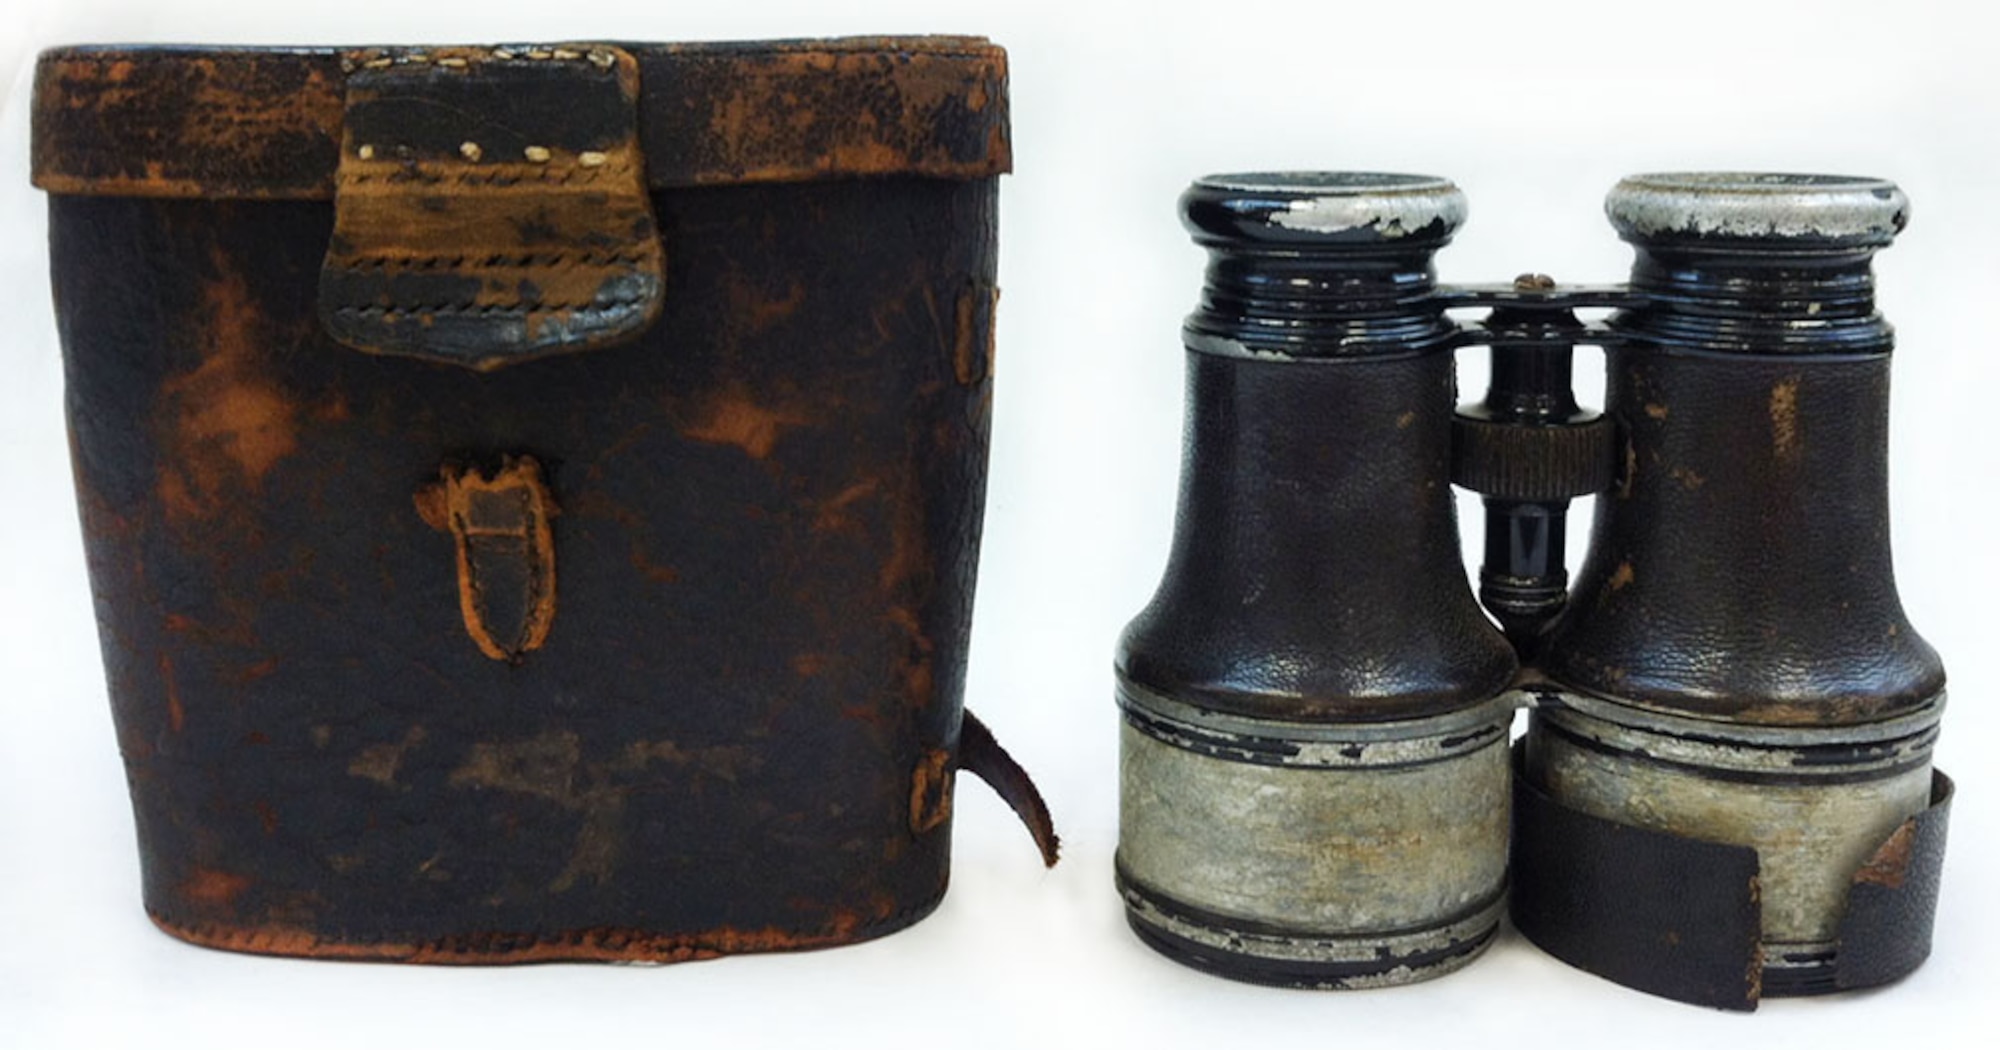 Binoculars, known as field glasses, were a very important piece of equipment for U.S. soldiers -- especially critical for observation (by land or balloon). "Field glasses" were in short supply, many soldiers either brought their own personal binoculars or received them through special Army and Navy donation campaigns, which collected binoculars from civilians back home to aid U.S. soldiers and sailors in the fight against the enemy.